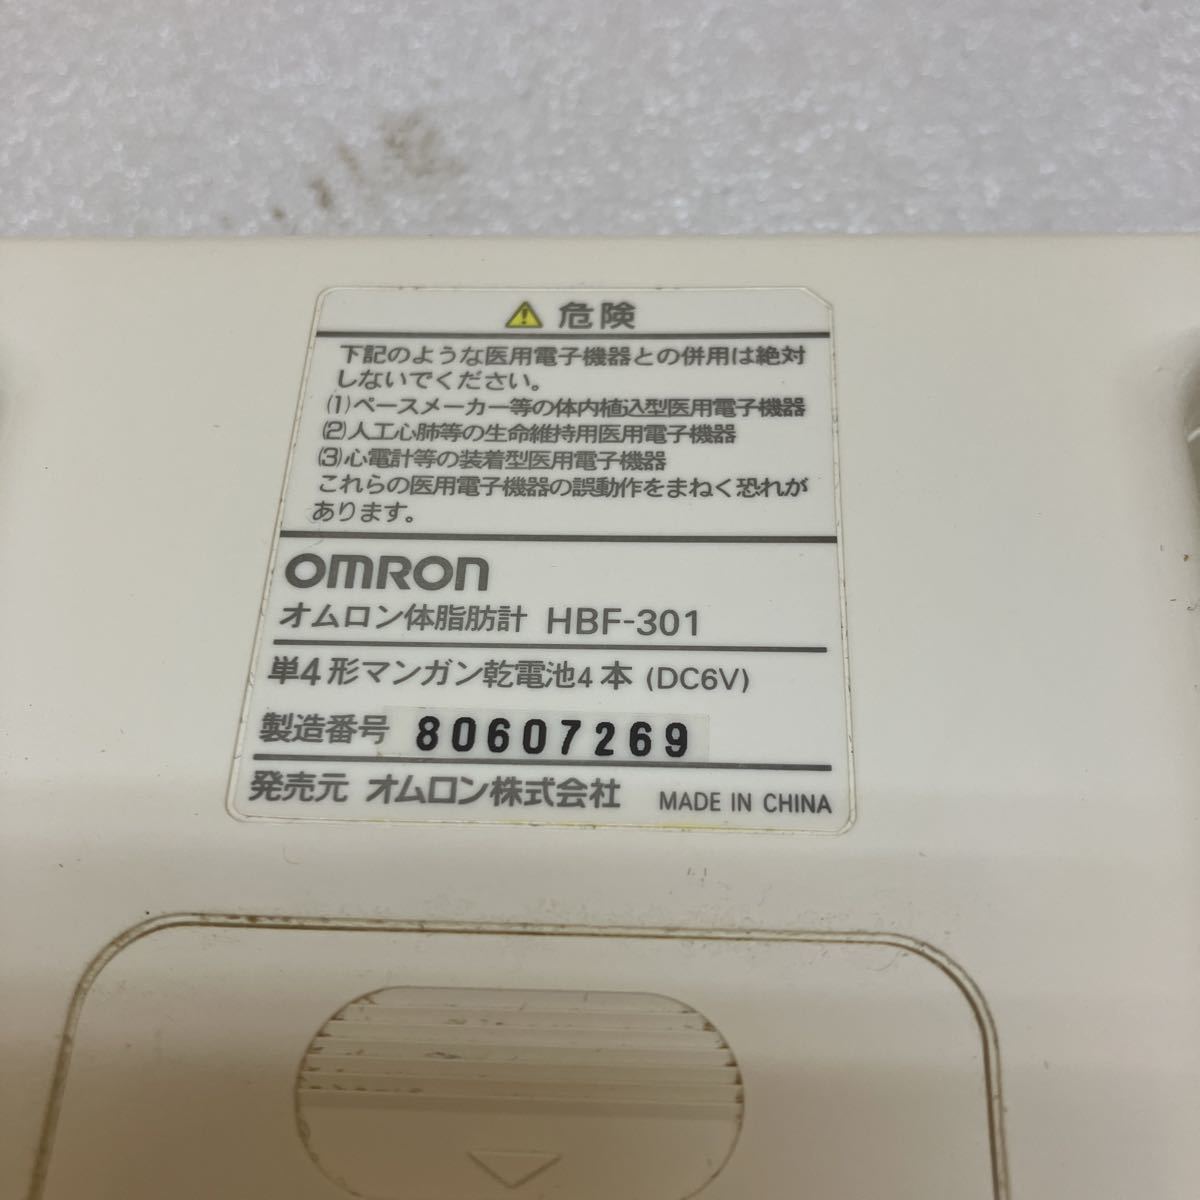 XL8993 beautiful goods OMRON Omron body fat meter HBF-301 operation verification ending 